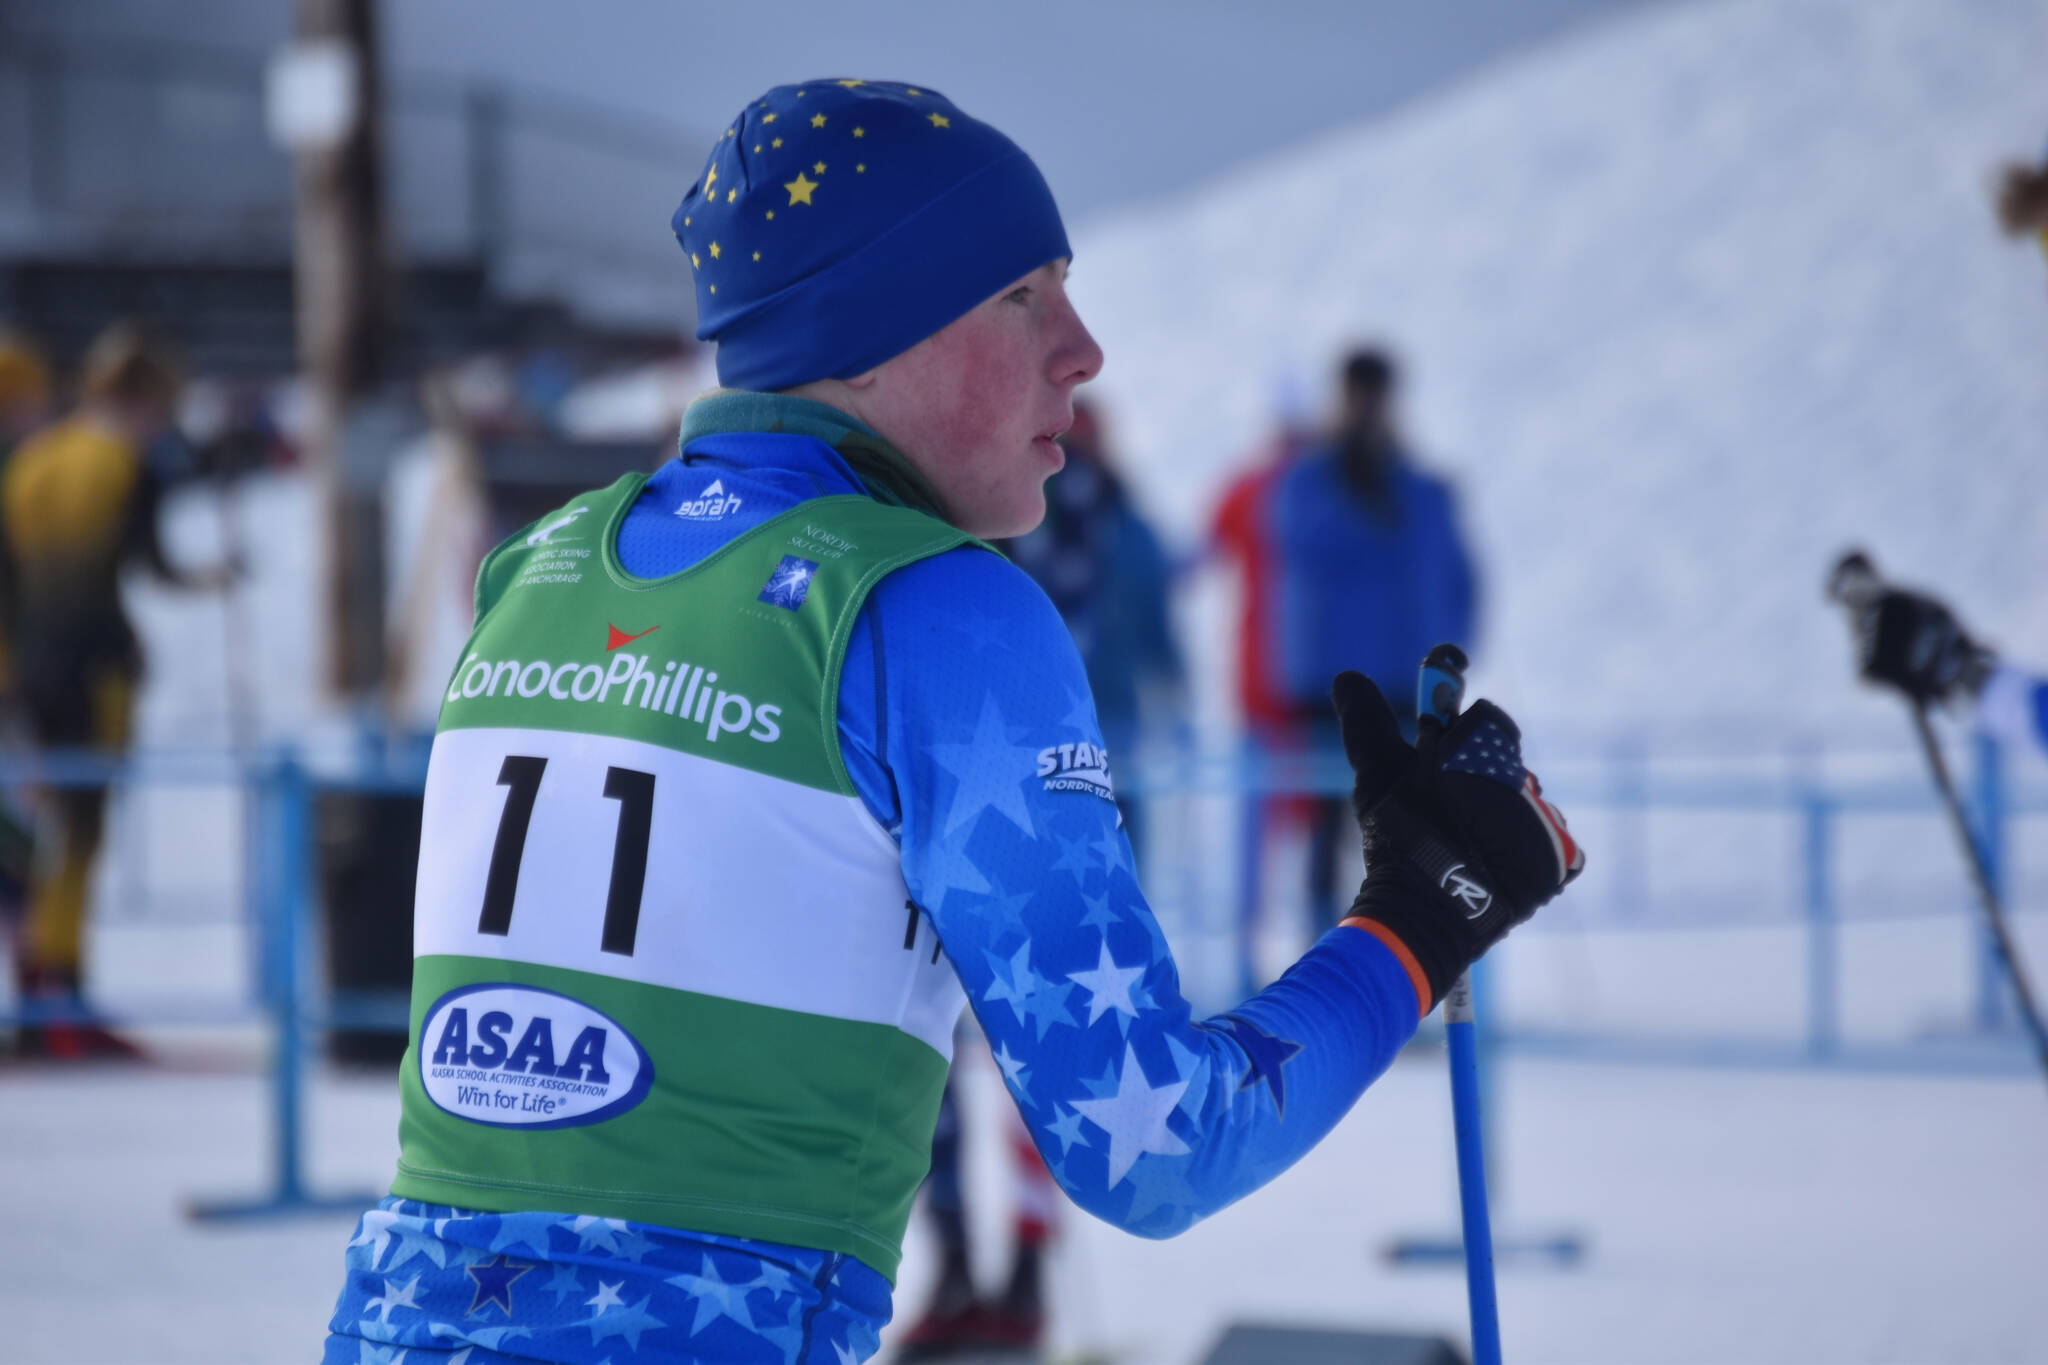 Bennjamin Abel, of Soldotna, waits for his teammate to tag him into the second leg of the boys 4x5-kilometer relay at the ASAA State Nordic Ski Championships at Kincaid Park in Anchorage, Alaska, on Saturday, Feb. 25, 2023. (Jake Dye/Peninsula Clarion)